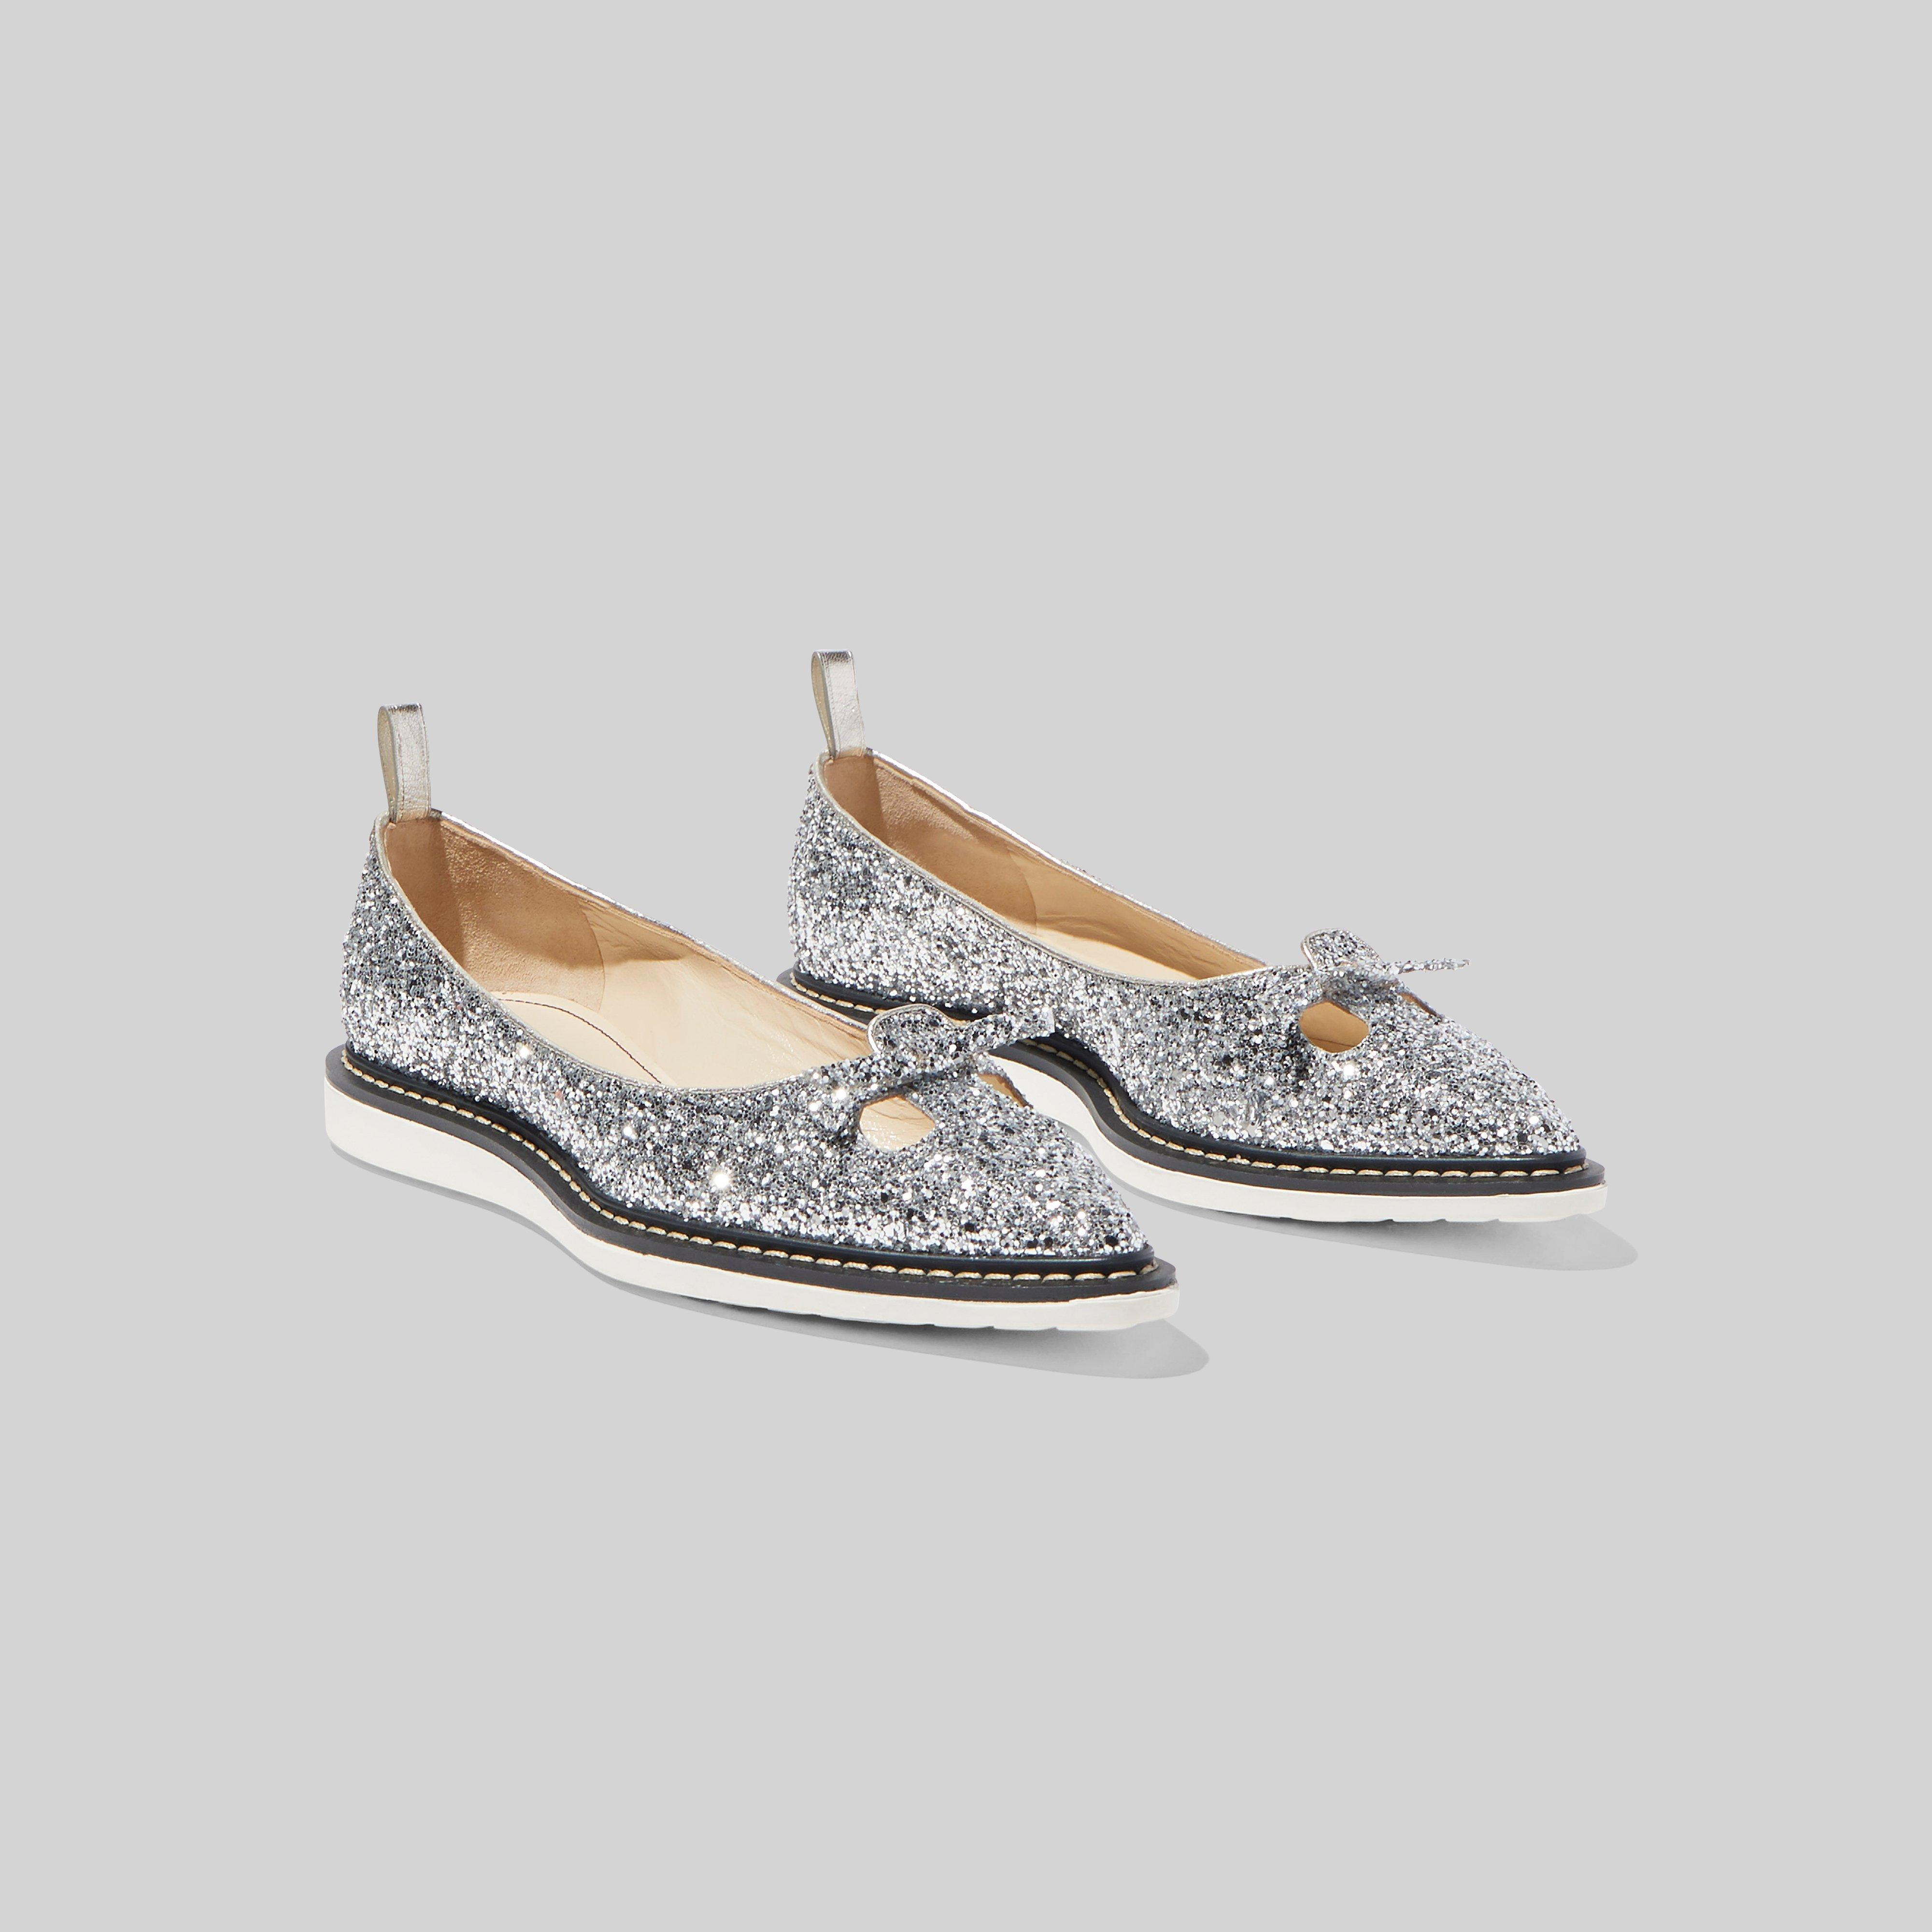 Marc Jacobs The Mouse Shoe Shoes in Silver (Metallic) - Lyst